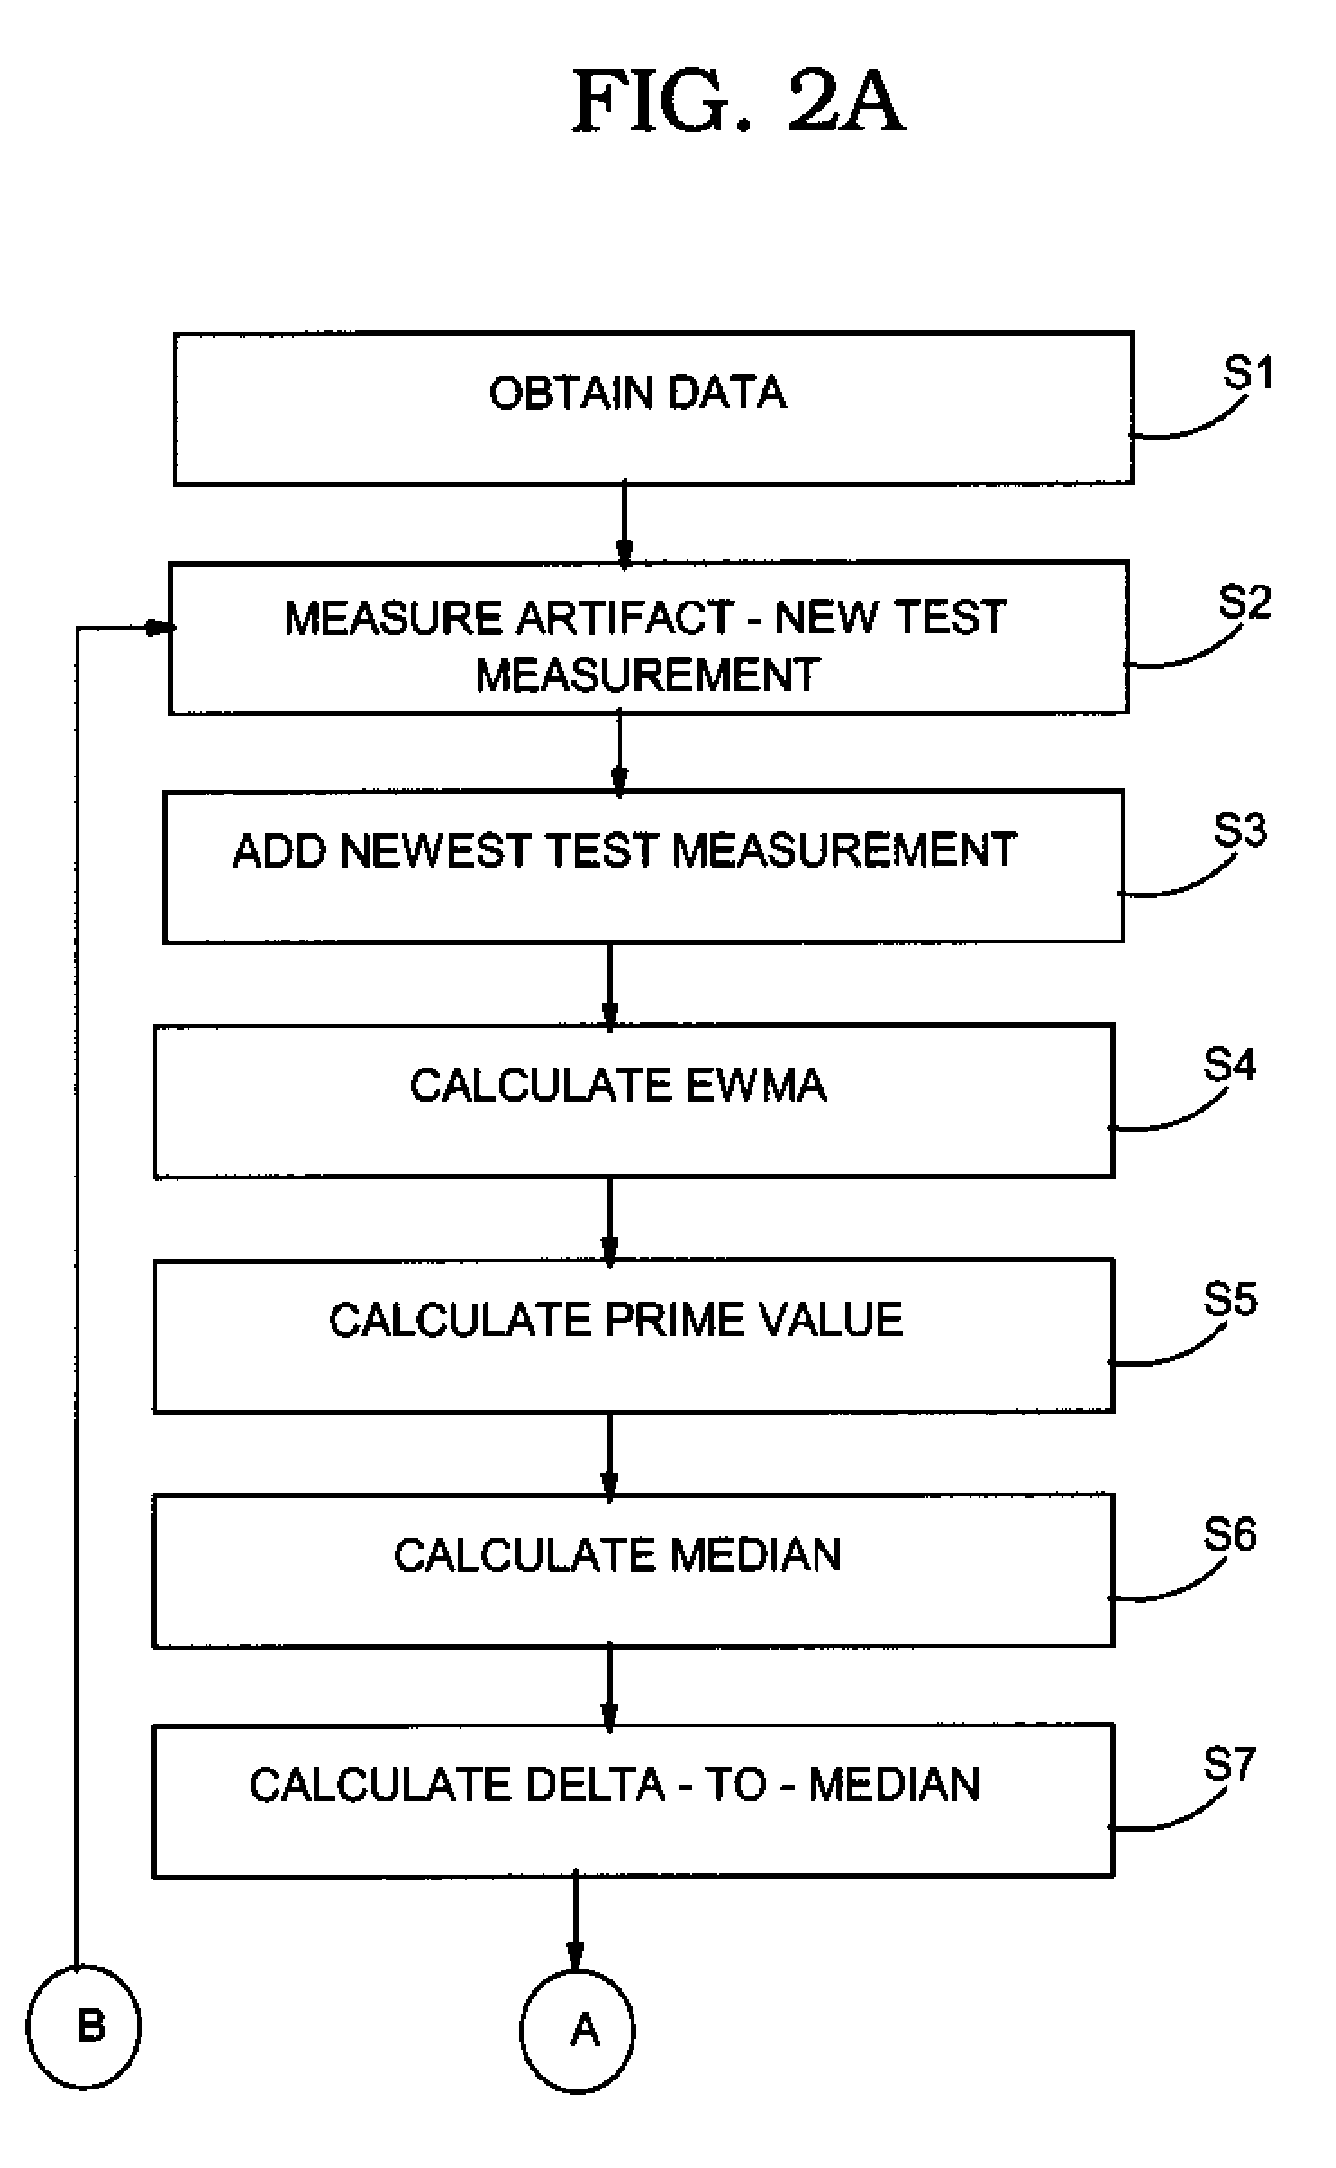 Offset determination for measurement system matching